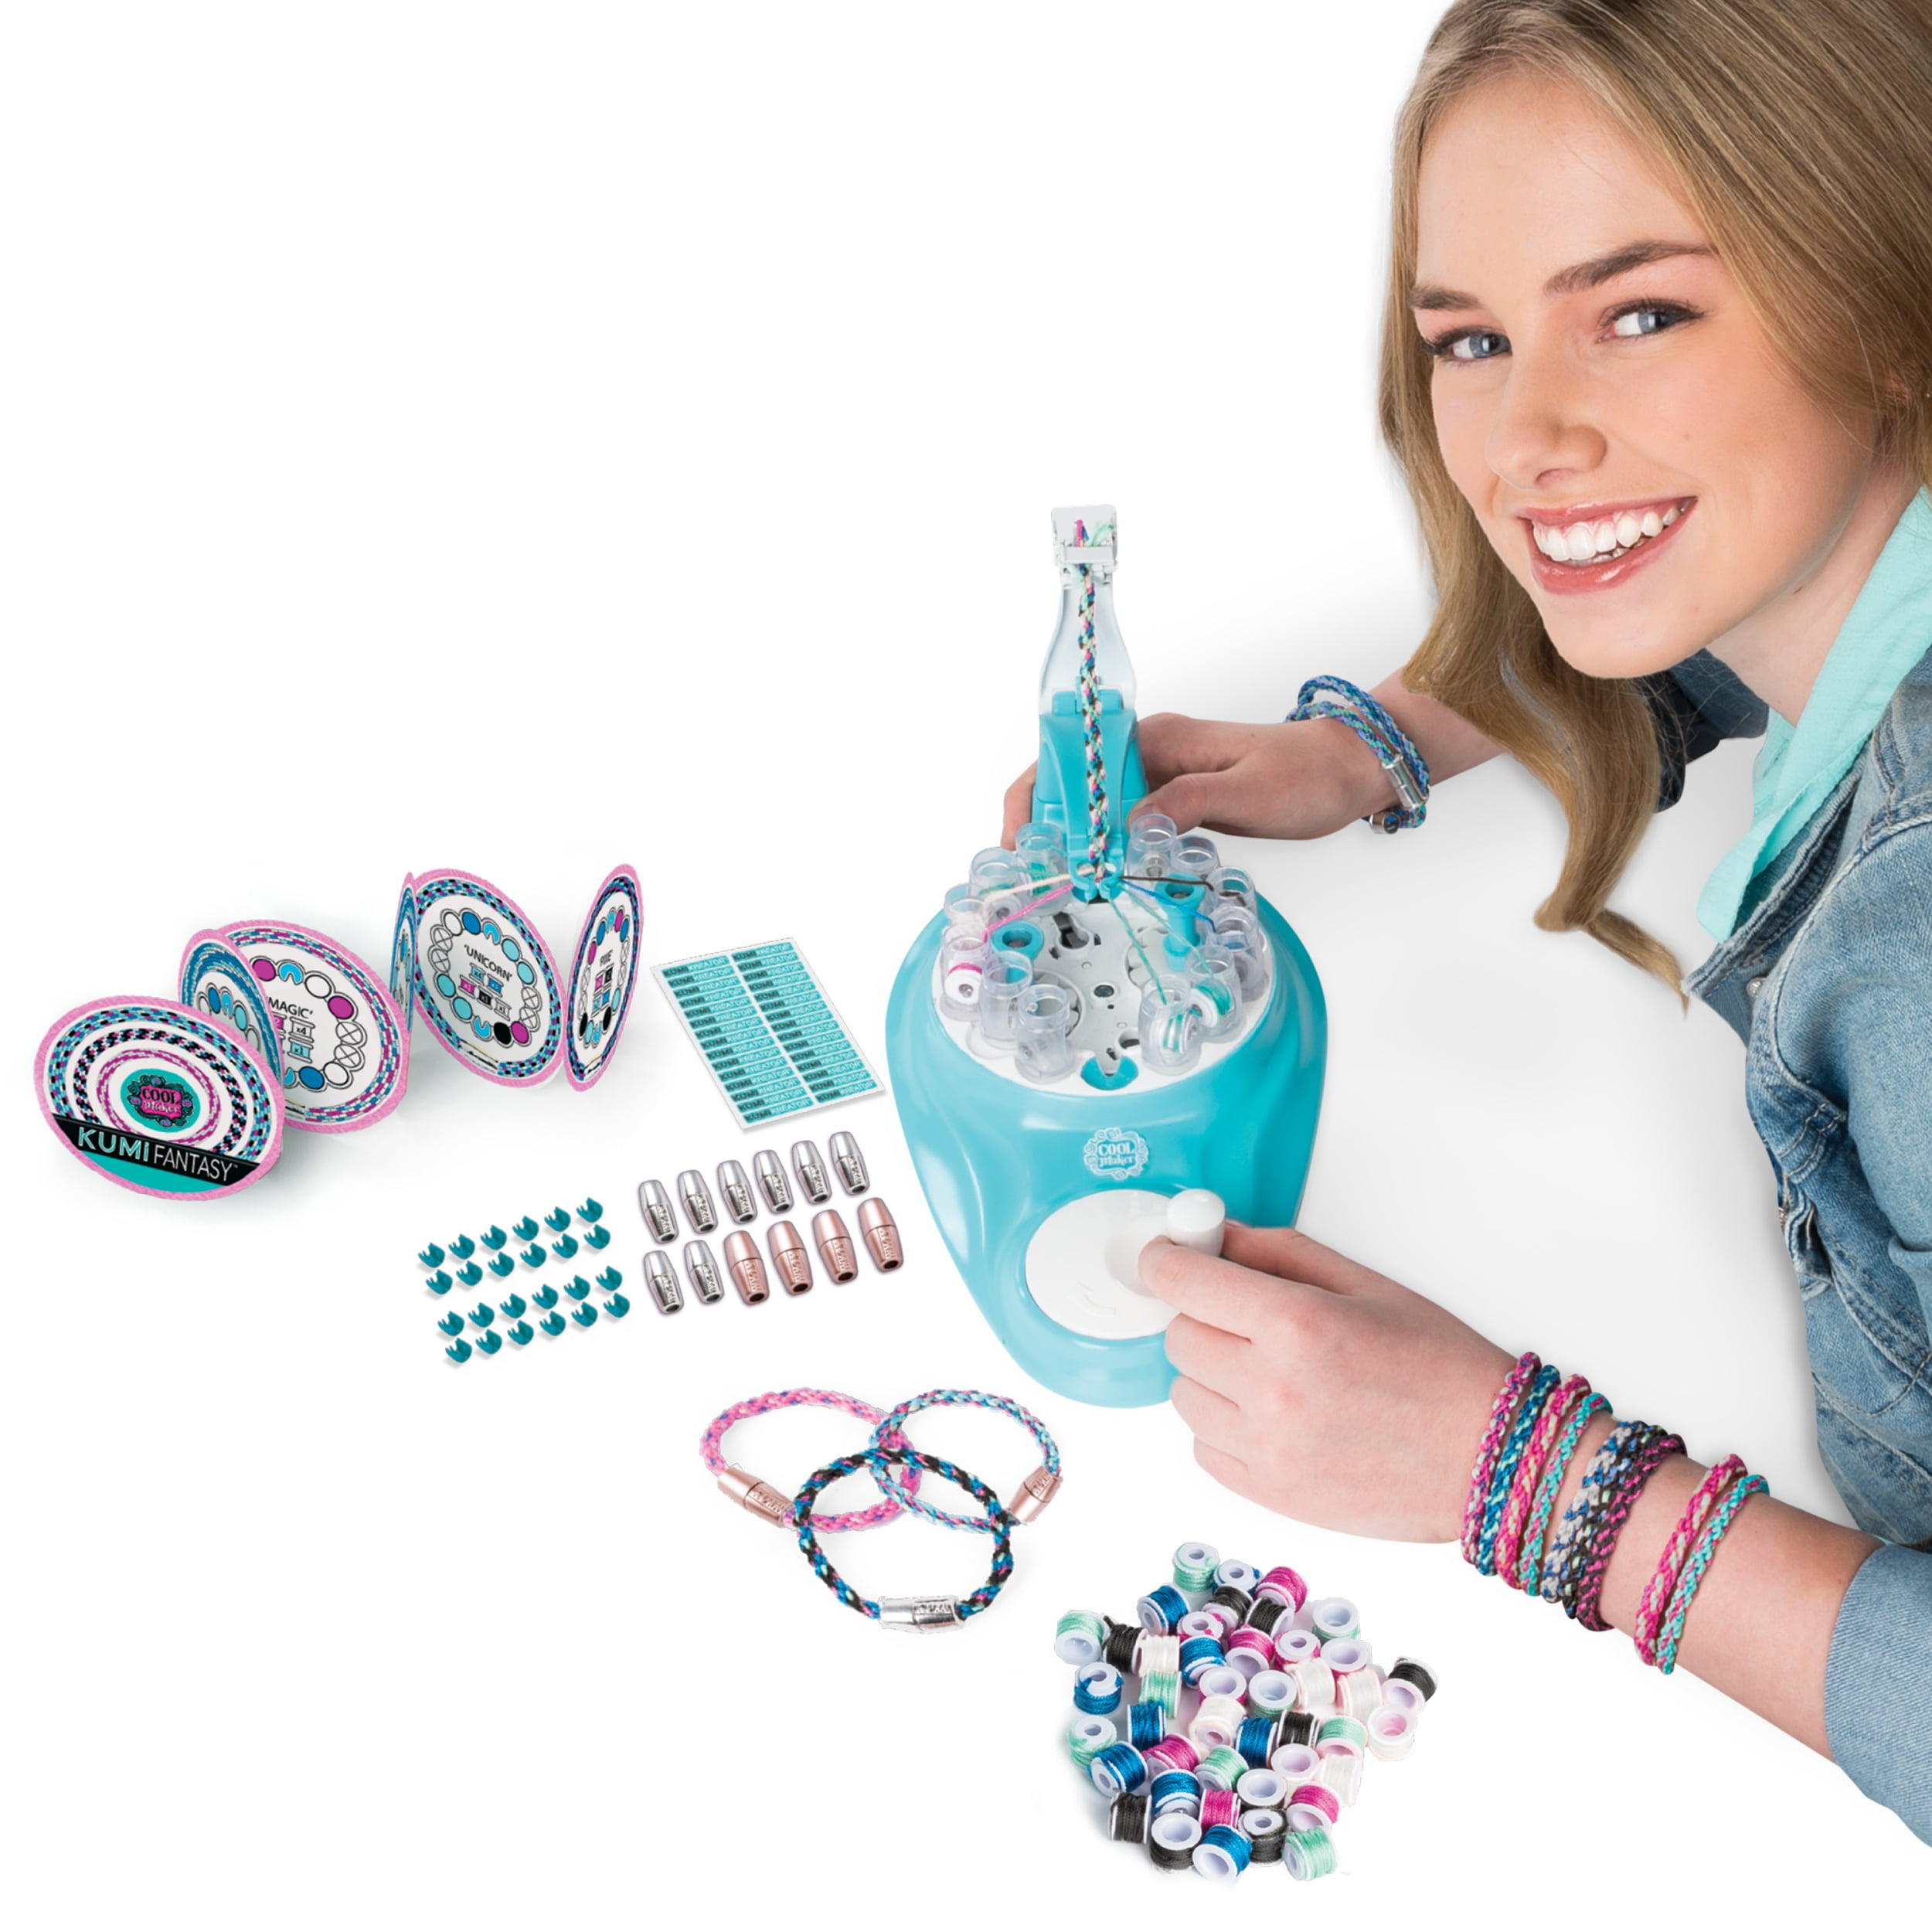 Cool Maker KumiKreator Bracelet Maker, You'll Get a Few Can I Get It?  Requests This Year Thanks to All These Trendy Toys Coming Out